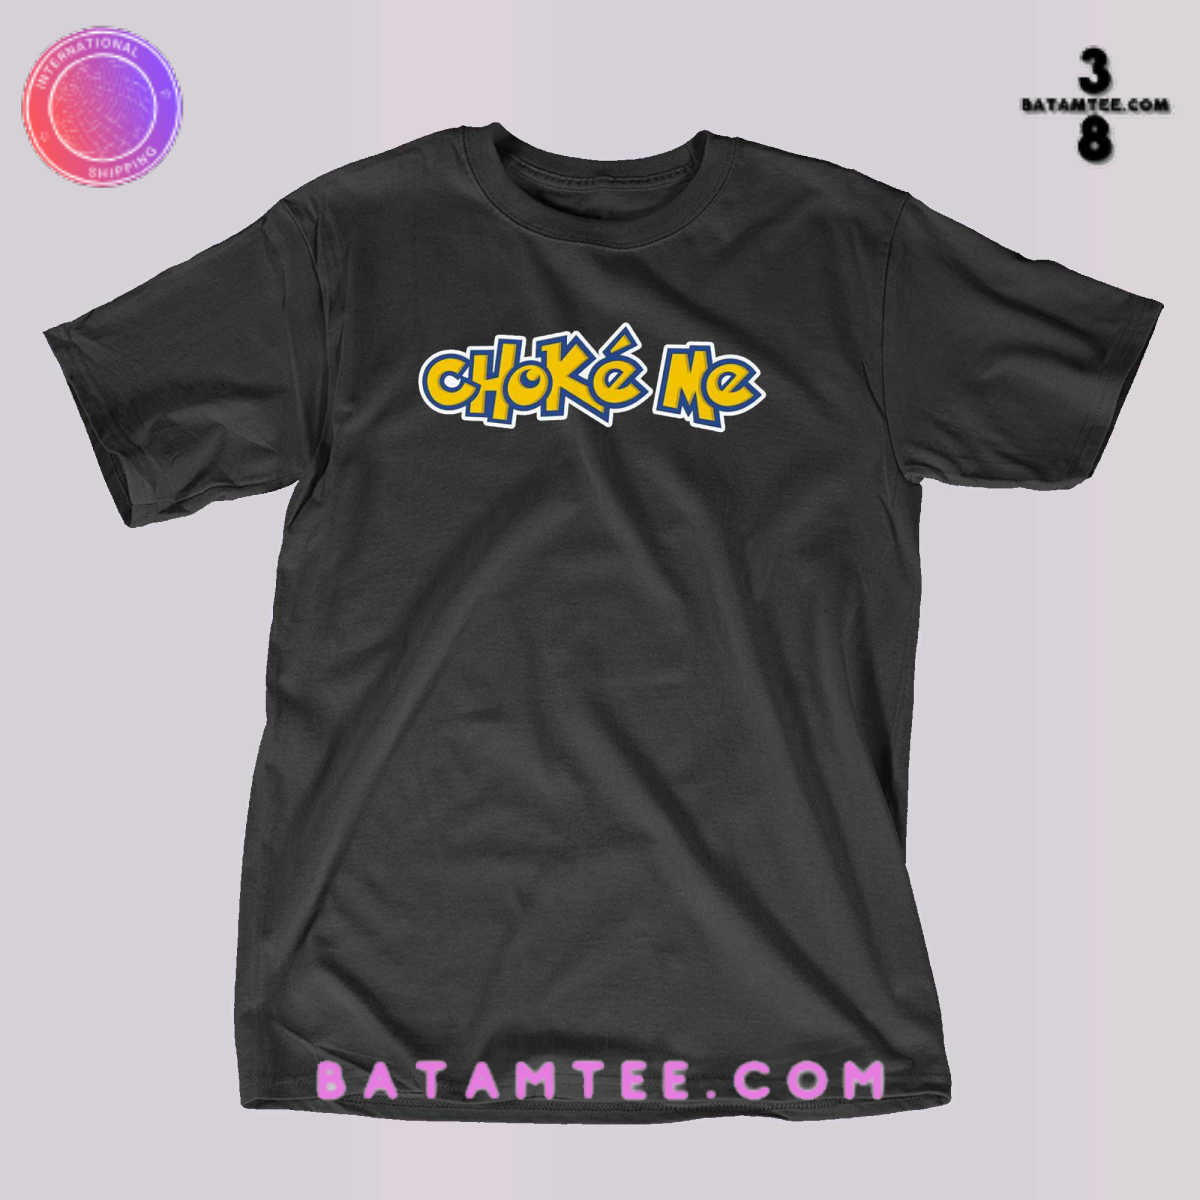 New product from Batamtee on 16/10/2023 - Batamtee Shop - Threads & Totes: Your Style Destination